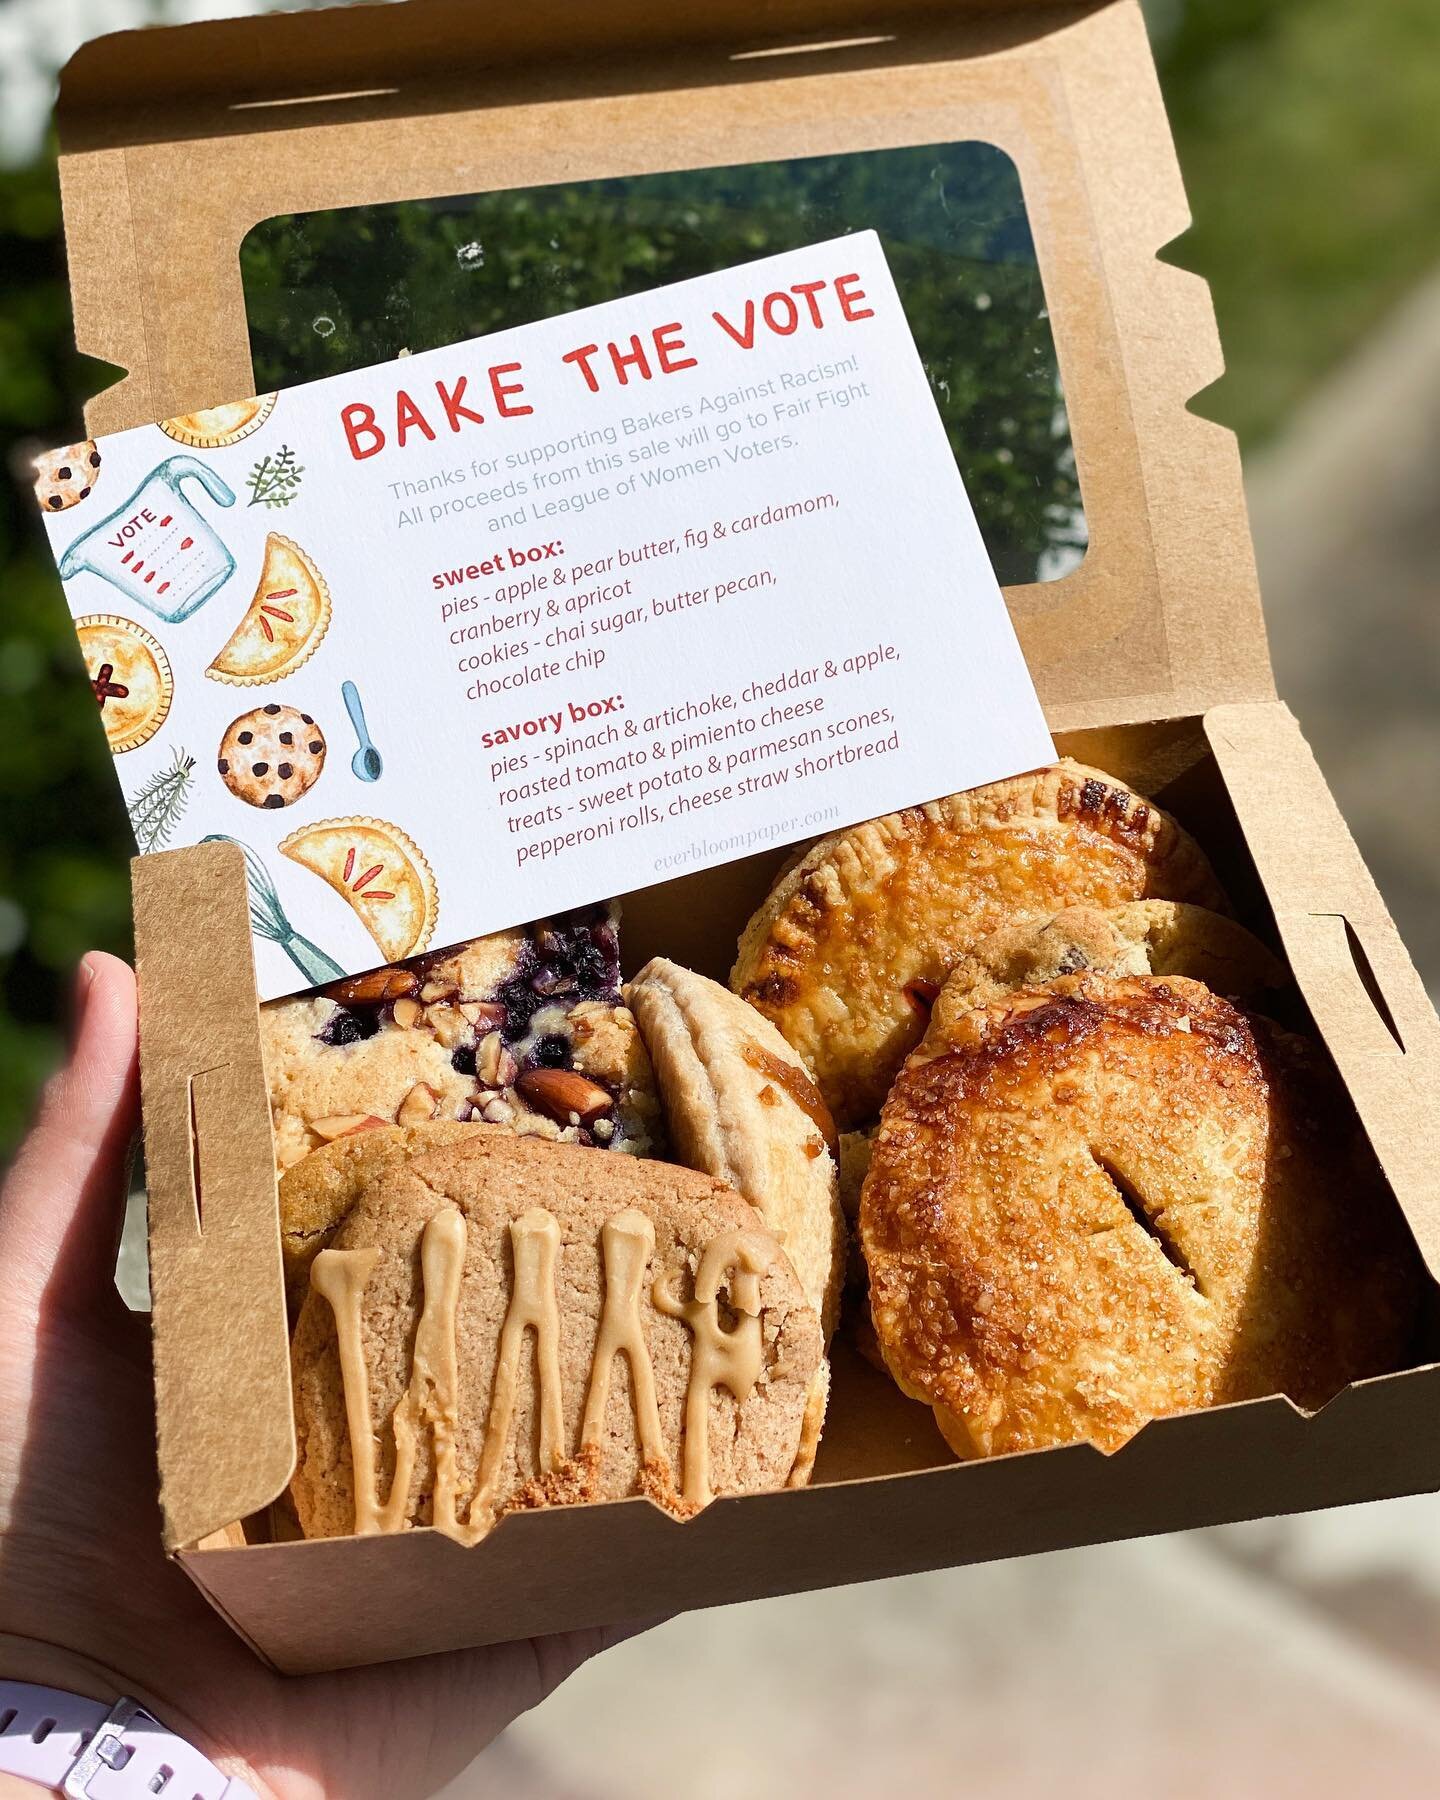 This weekend, a group of friends and talented bakers held another bake sale. With a short 7 days of planning and 4 days of advertising, this small group of kickass women raised over $1,000 selling hand pies, cookies, and pastries. To everyone who sup